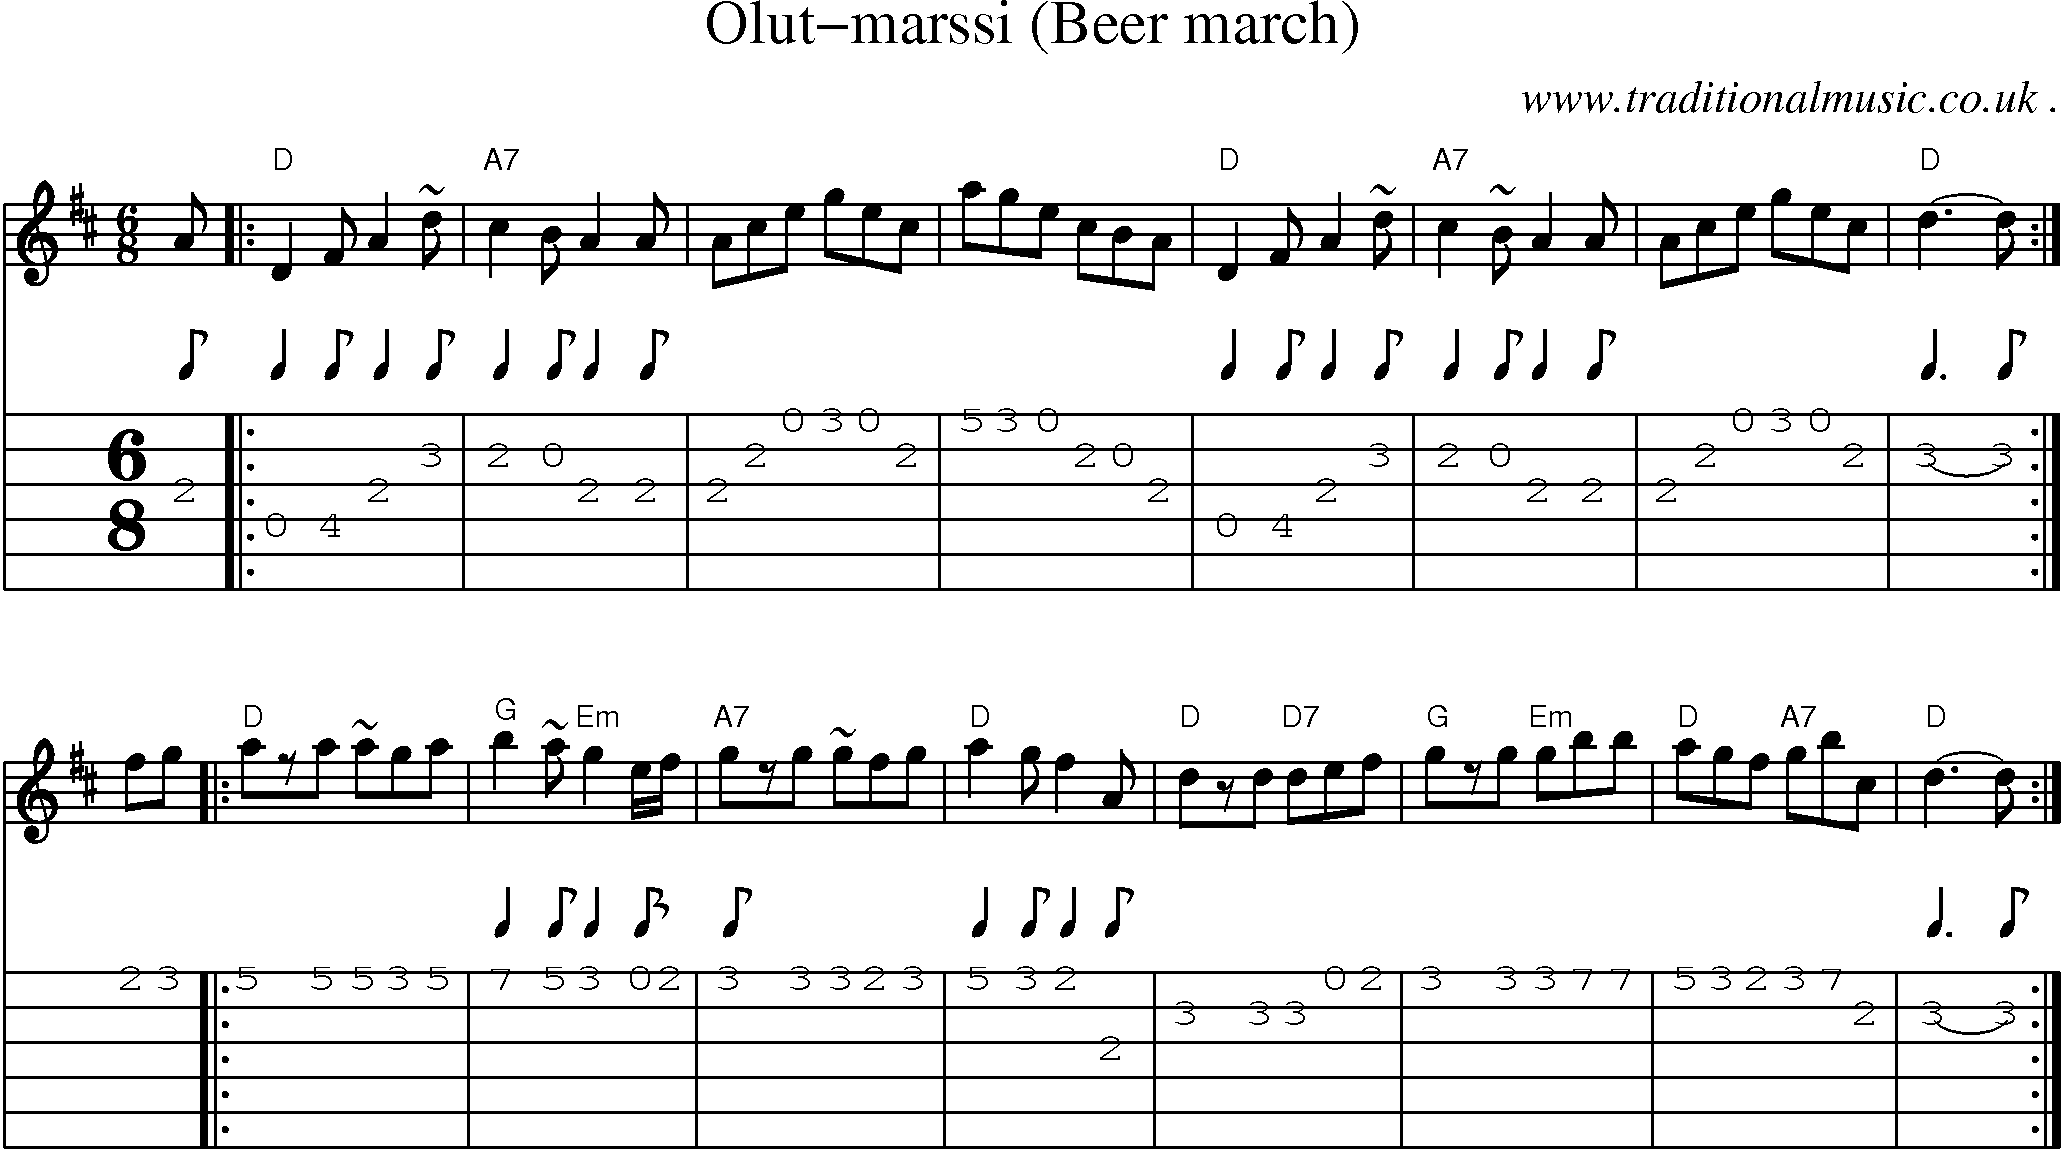 Sheet-music  score, Chords and Guitar Tabs for Olut-marssi Beer March